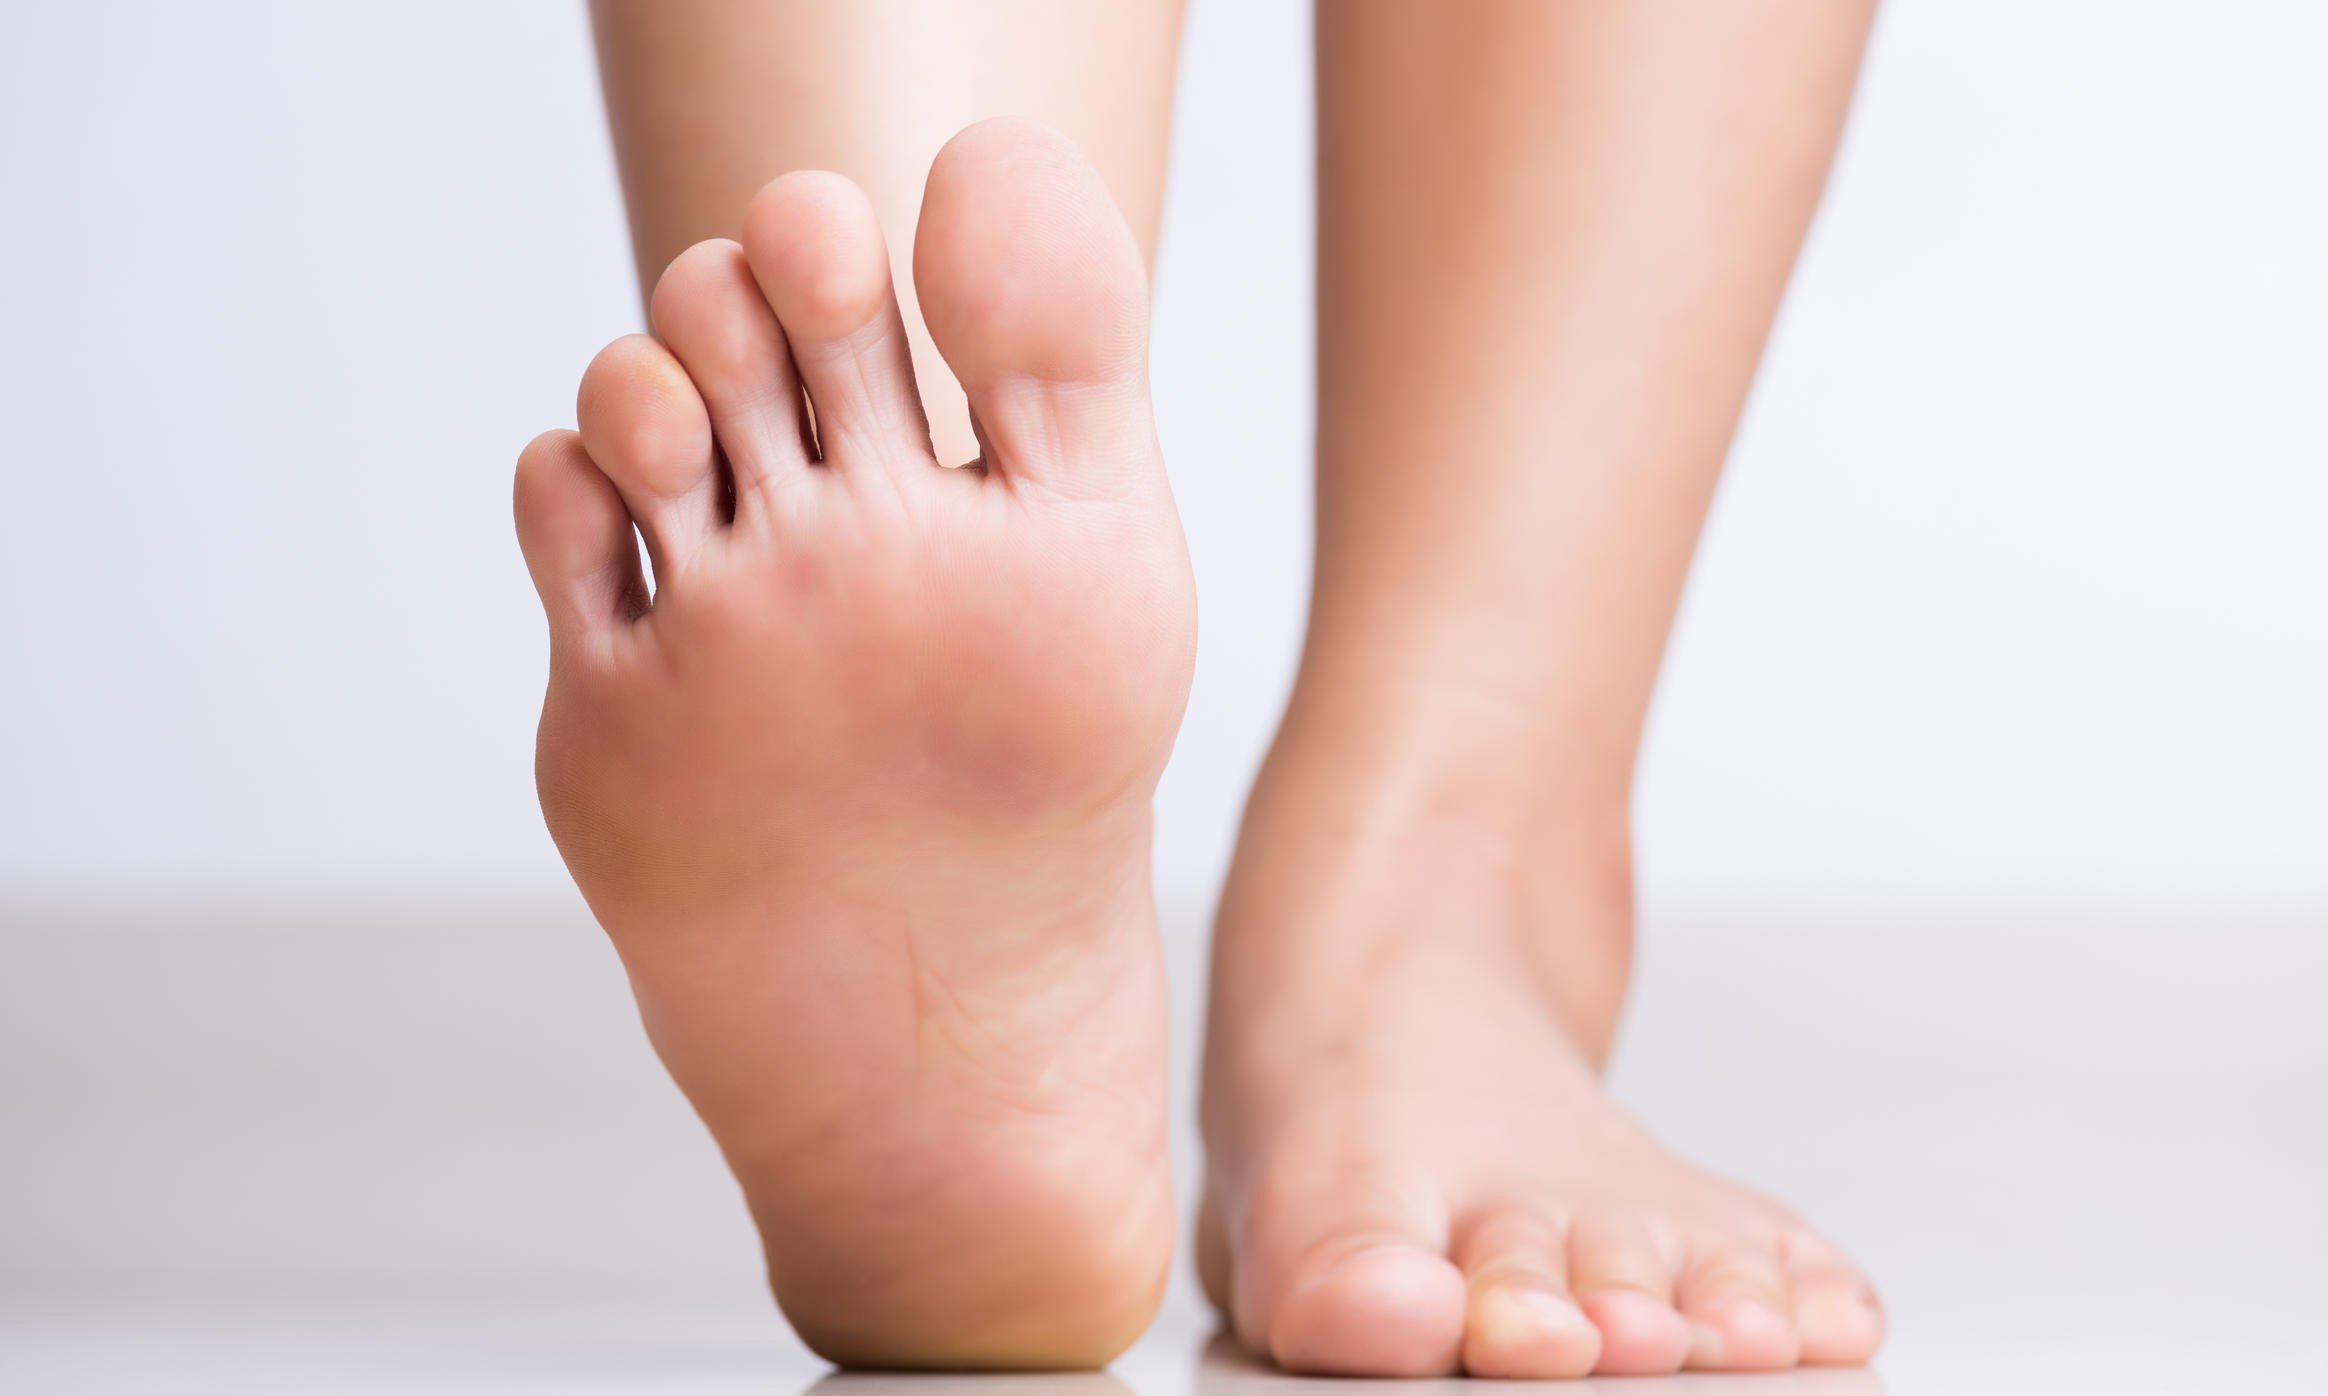 The Most Important Foot Care Rules